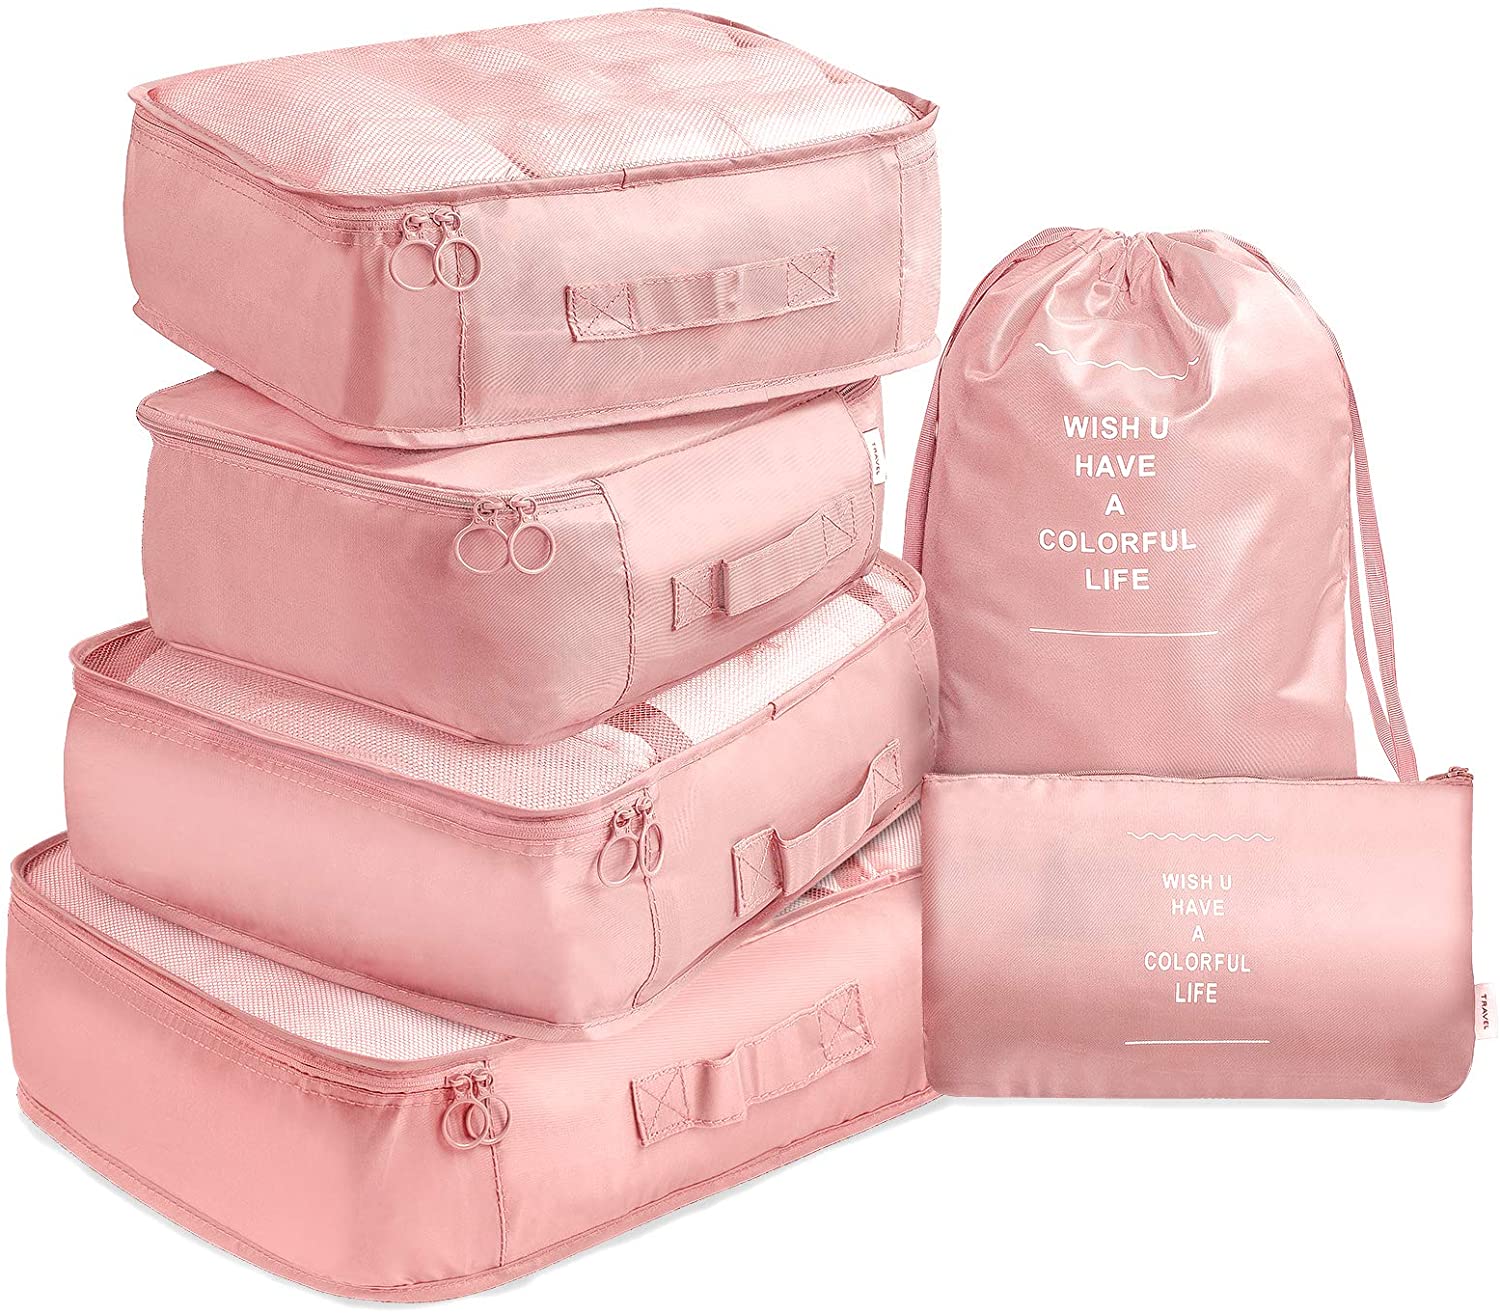 Travel Luggage Organizer Bags (6 Pieces, Pink).